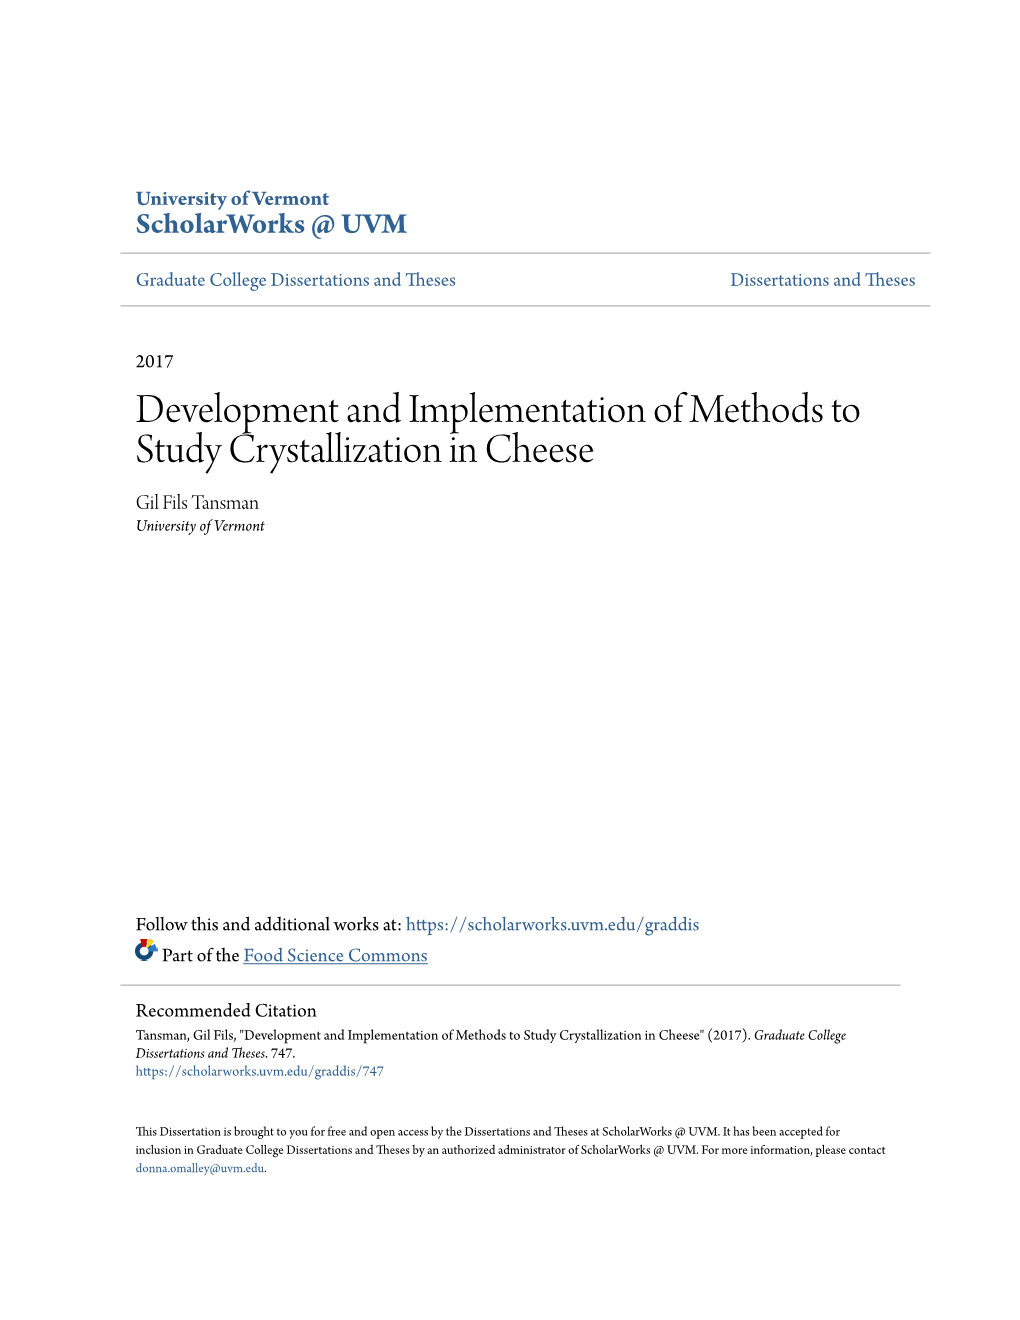 Development and Implementation of Methods to Study Crystallization in Cheese Gil Fils Tansman University of Vermont